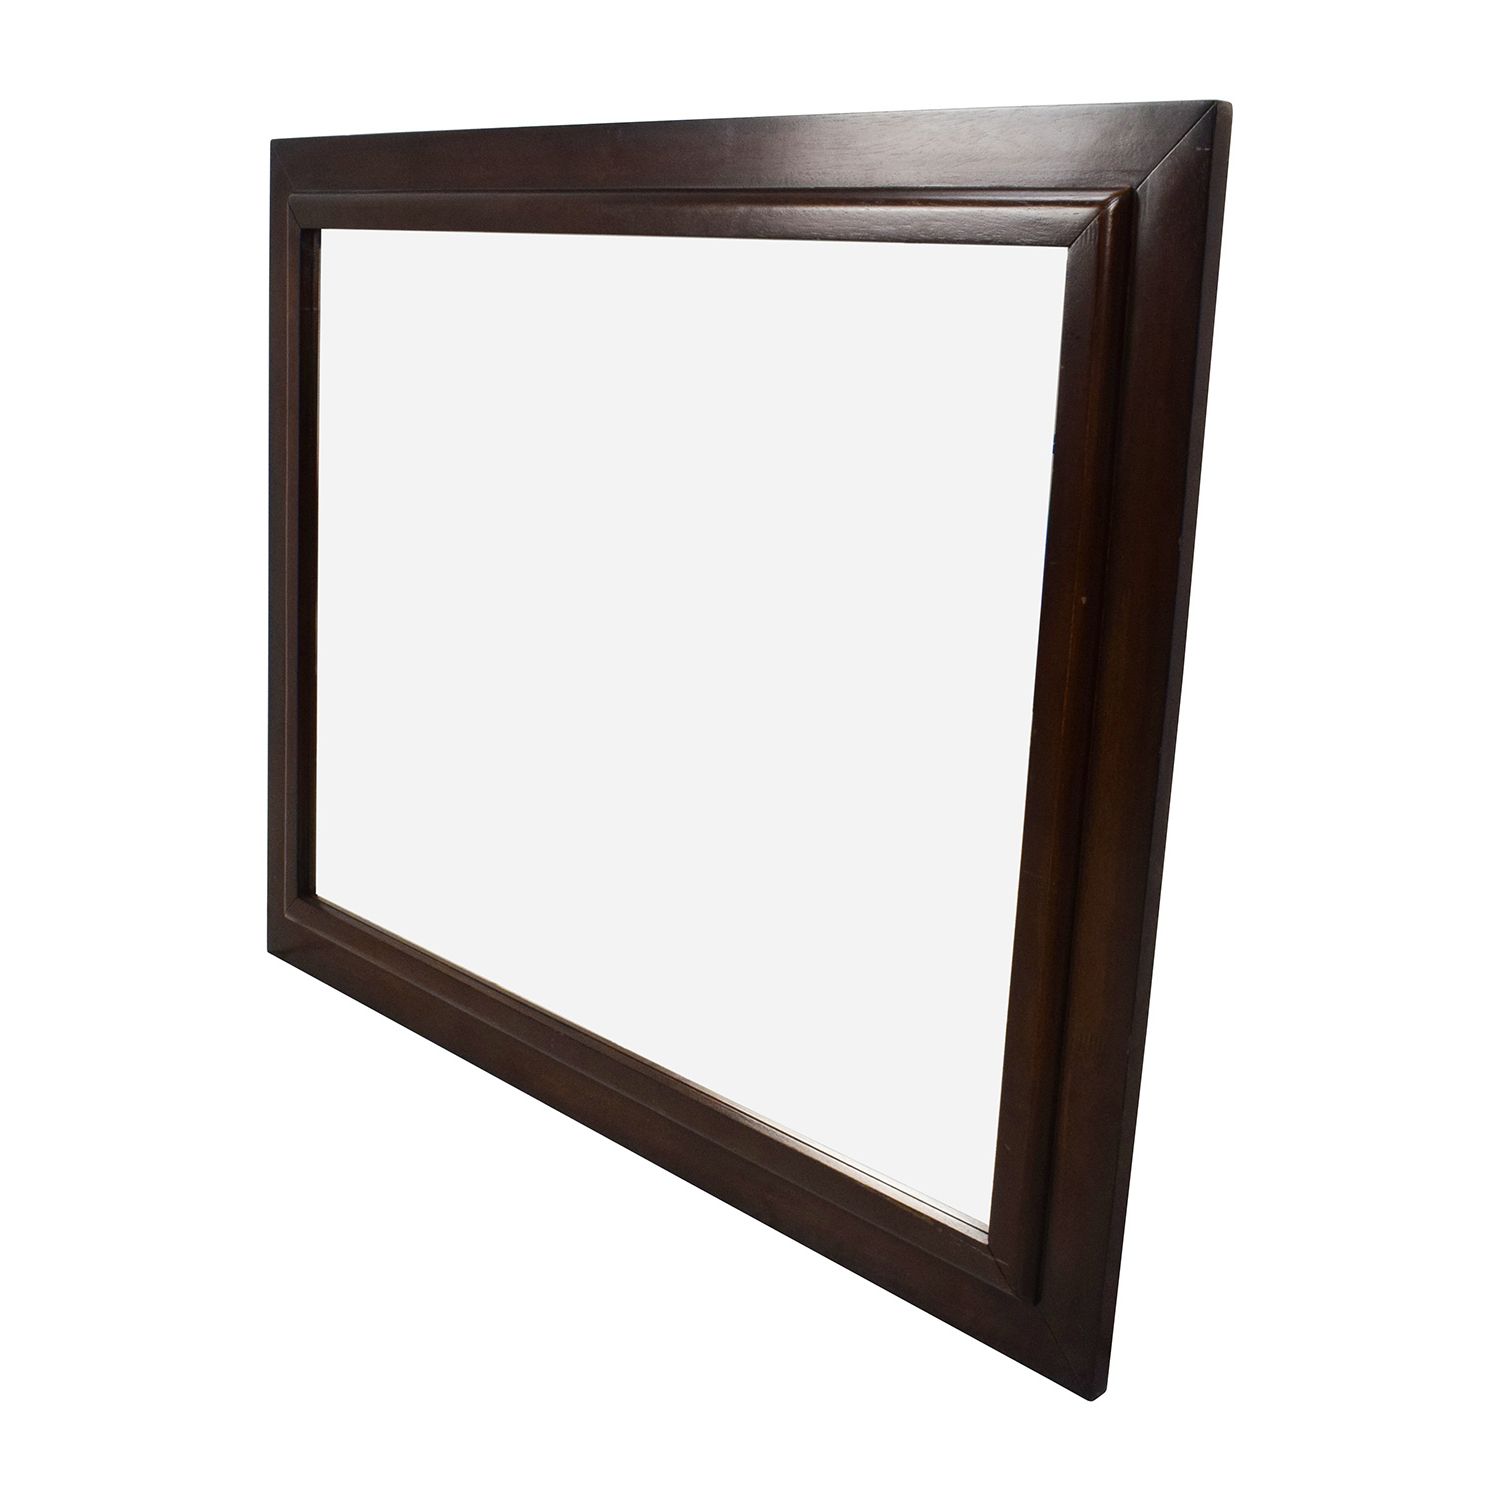 [%80% Off – Large Square Wood Framed Wall Mirror / Decor Throughout Well Known Large Wood Framed Wall Mirrors|large Wood Framed Wall Mirrors With Best And Newest 80% Off – Large Square Wood Framed Wall Mirror / Decor|most Current Large Wood Framed Wall Mirrors Inside 80% Off – Large Square Wood Framed Wall Mirror / Decor|most Current 80% Off – Large Square Wood Framed Wall Mirror / Decor Throughout Large Wood Framed Wall Mirrors%] (View 4 of 20)